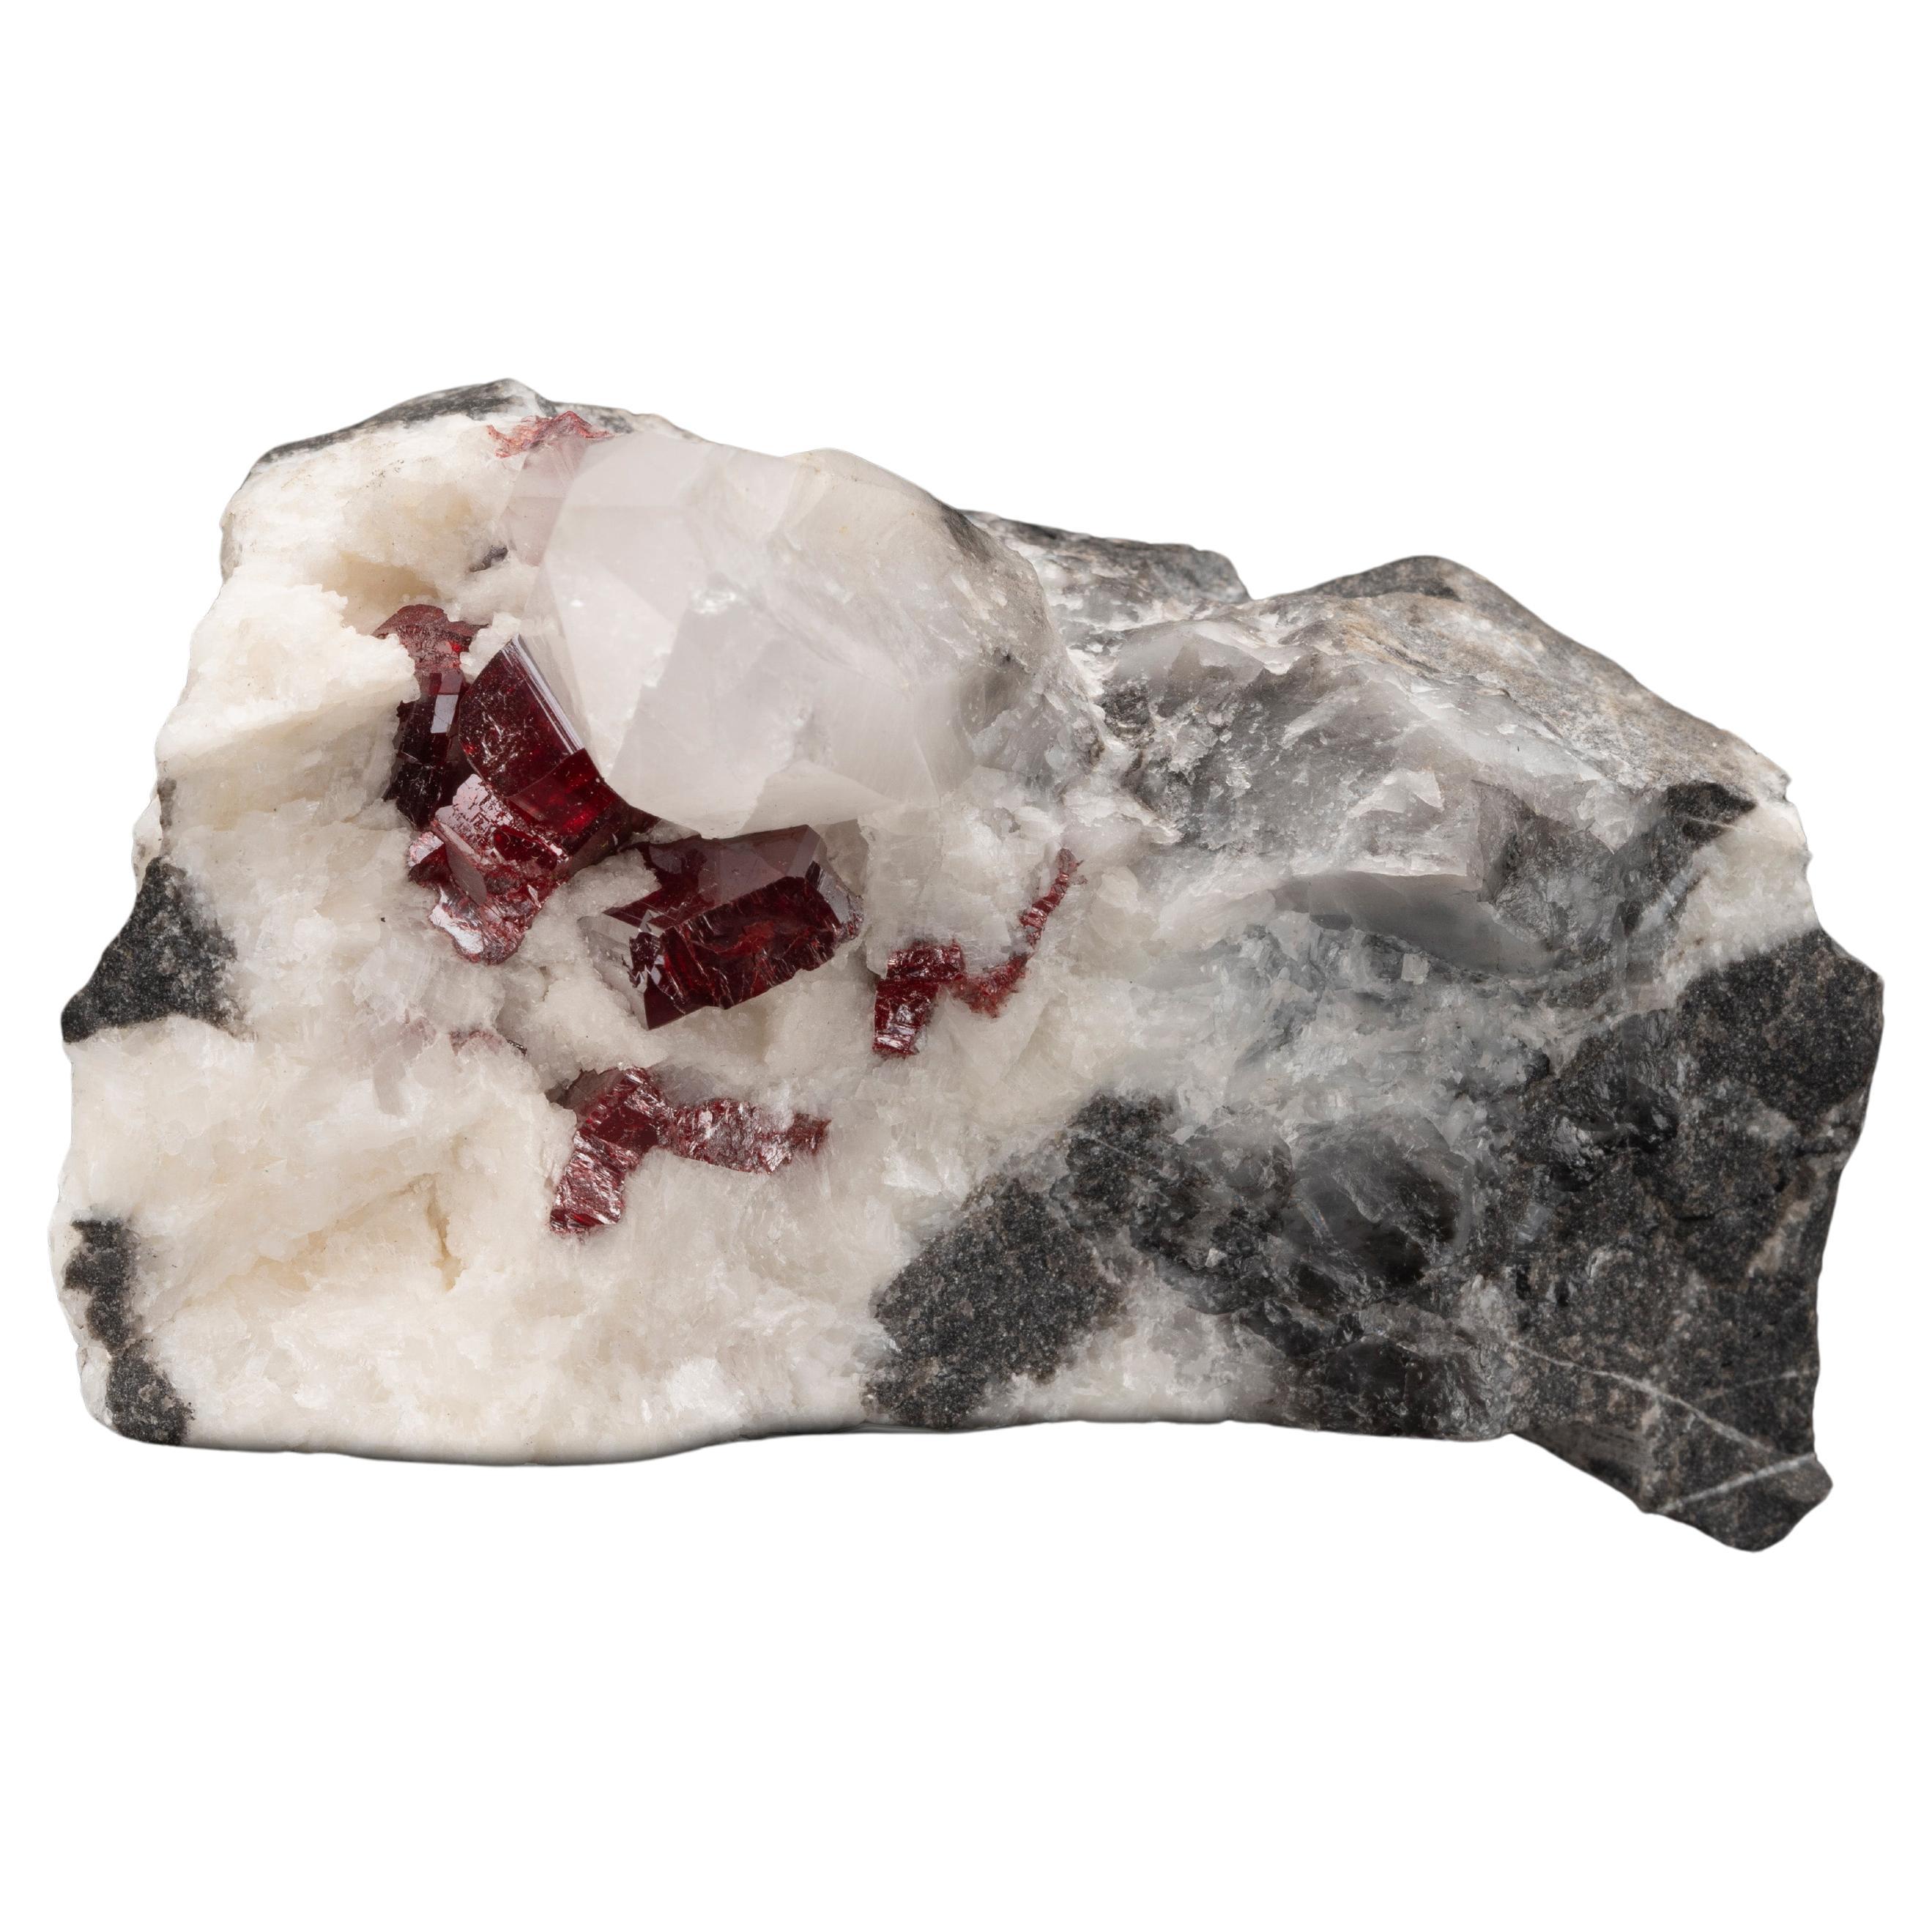 Cinnabar With Quartz From China